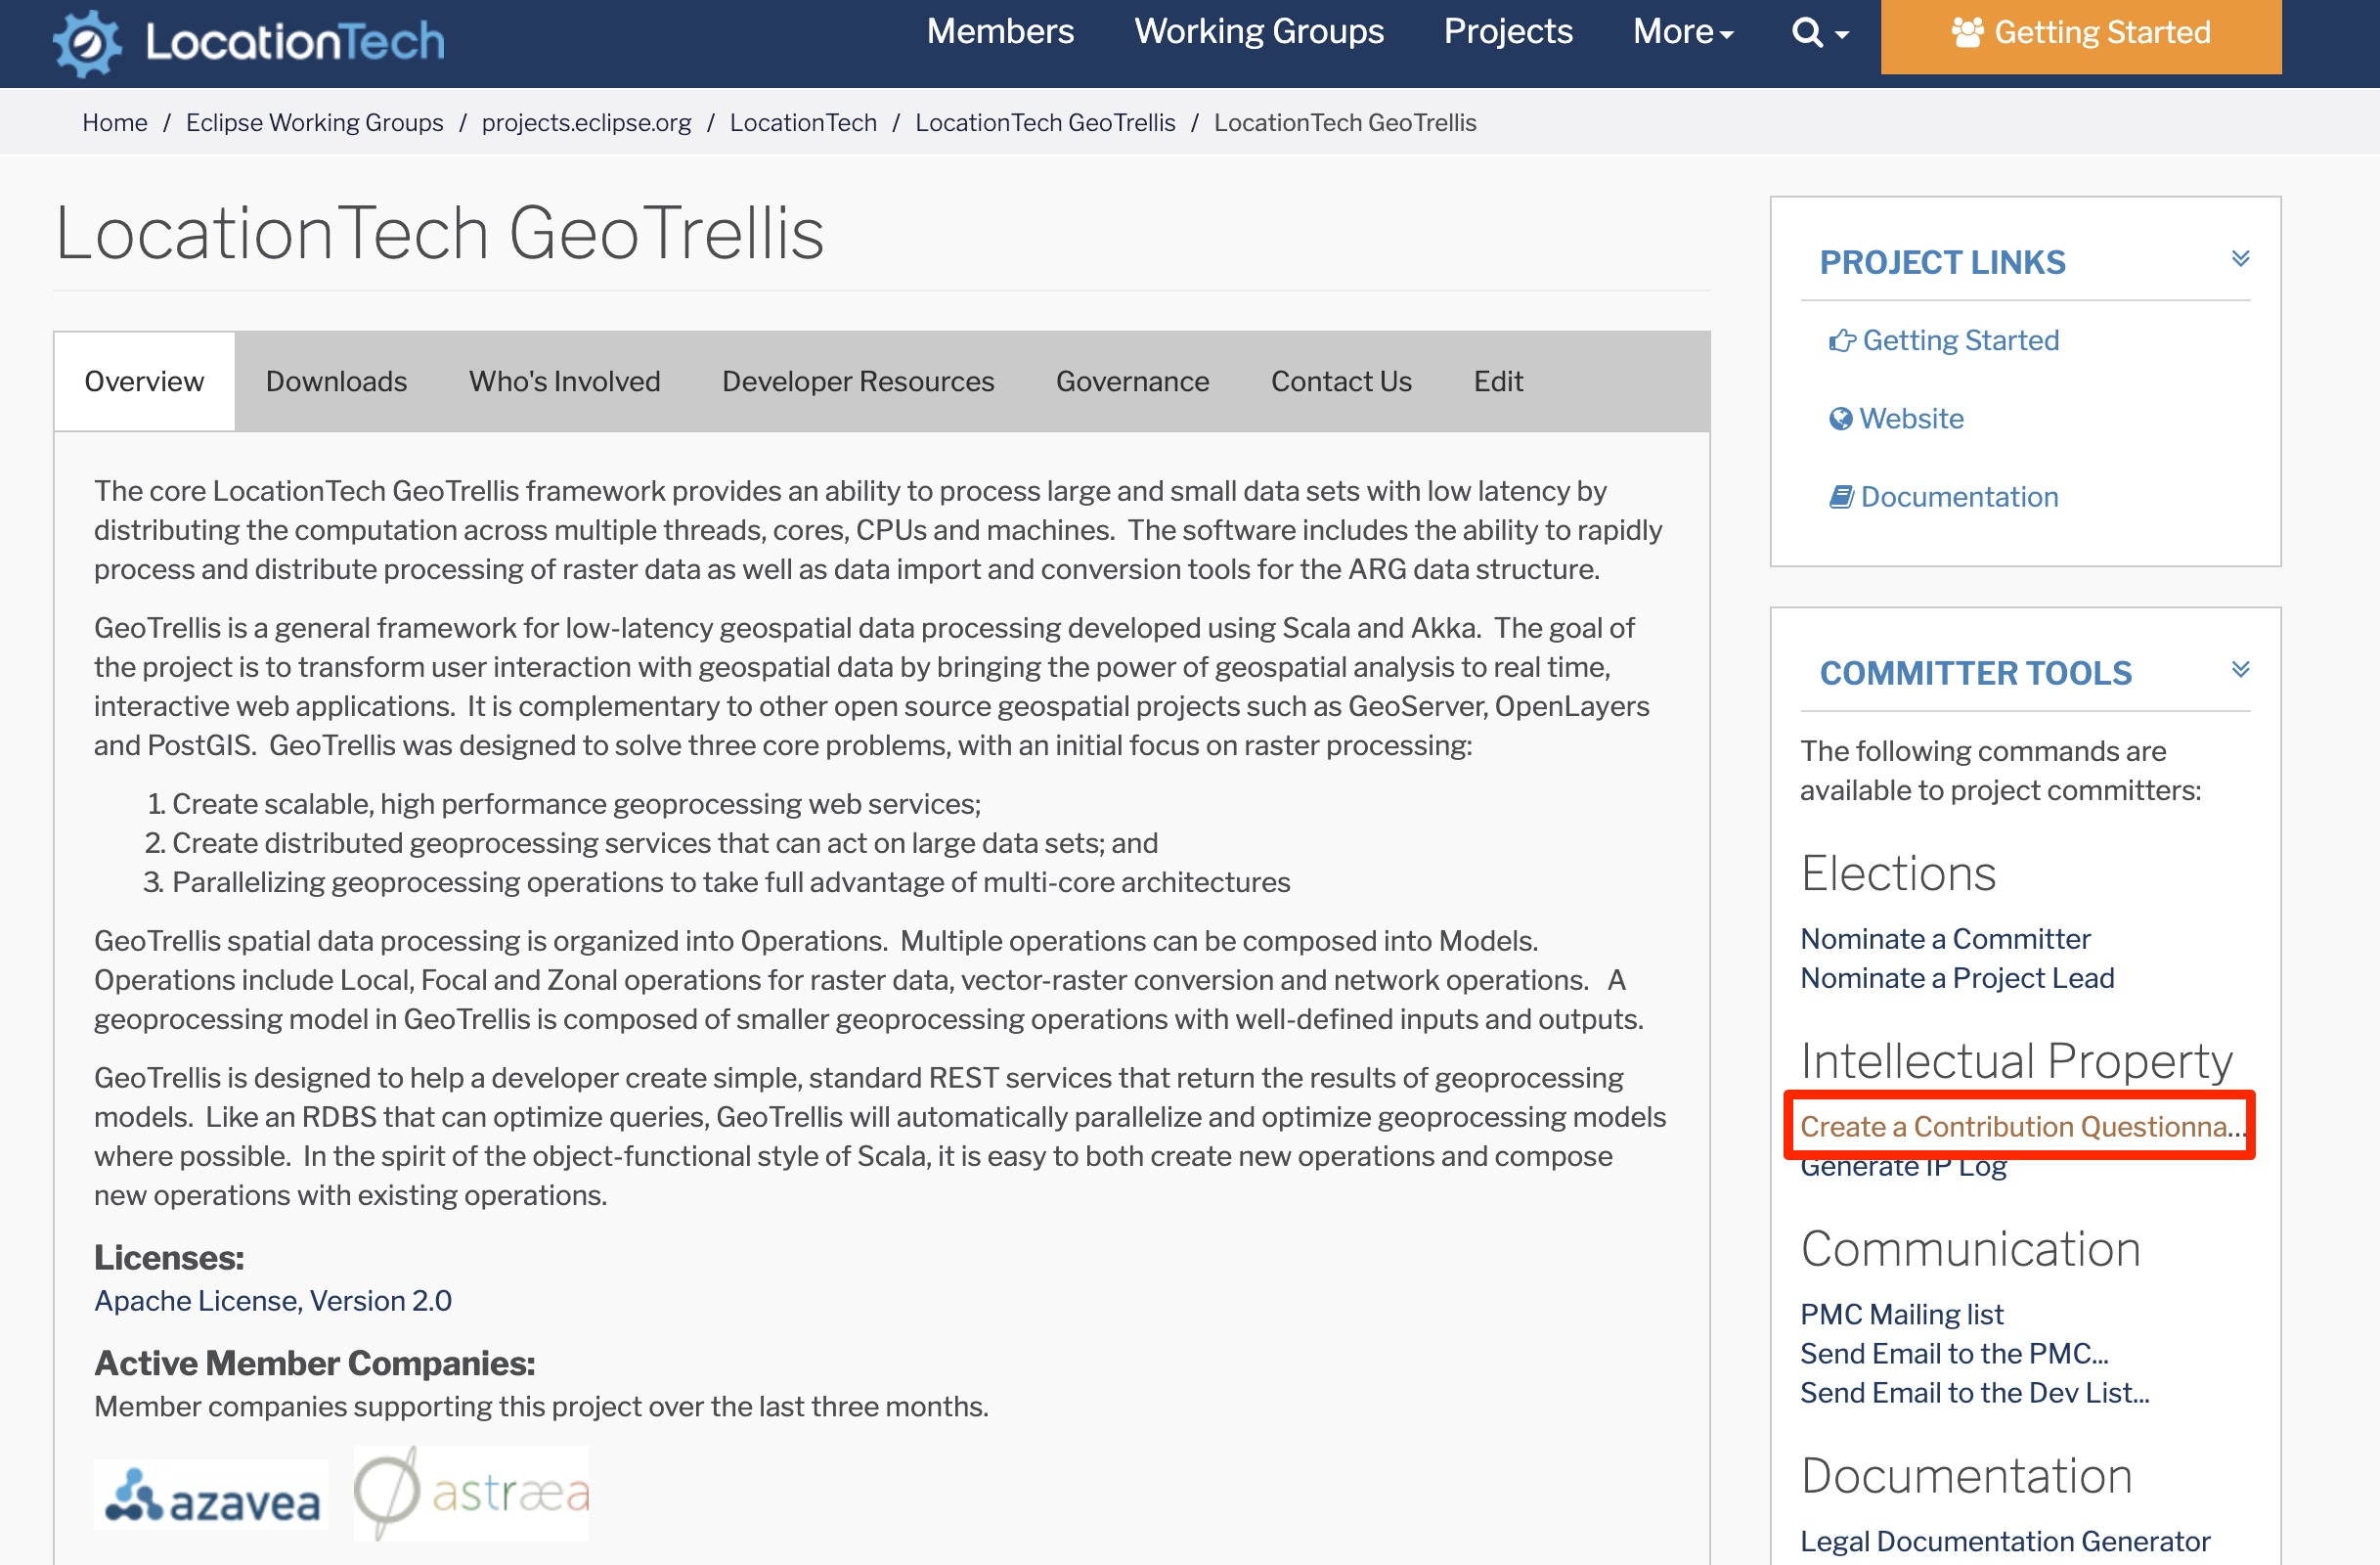 The GeoTrellis project page